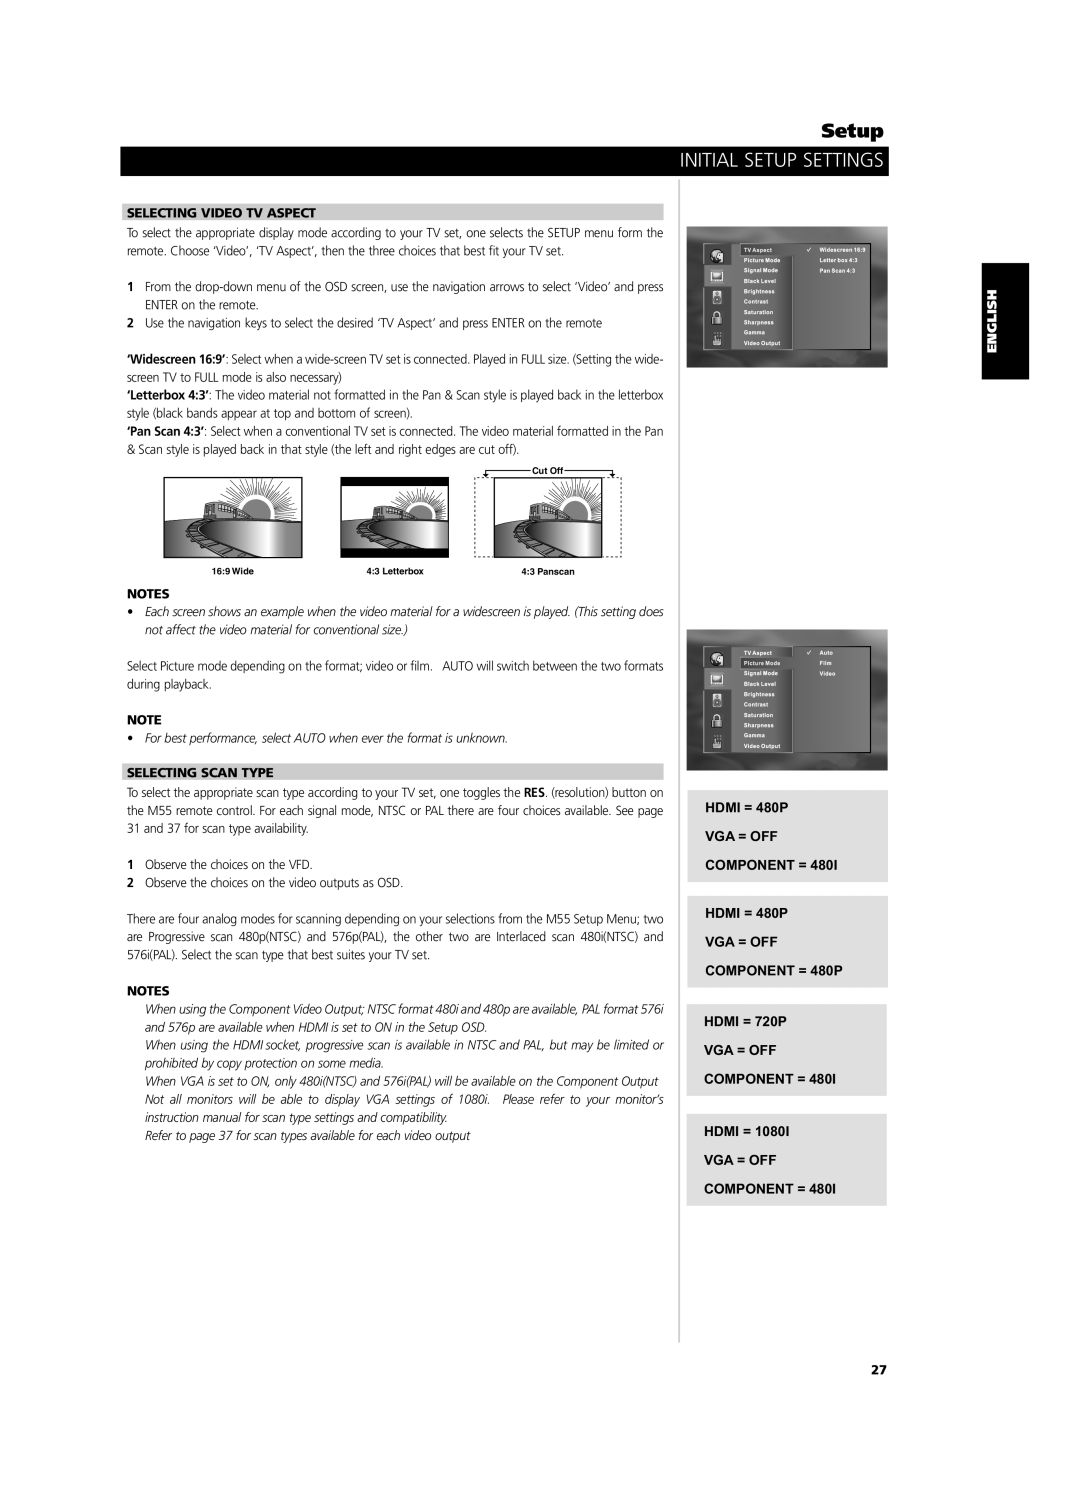 NAD M55 owner manual Initial Setup Settings, Selecting Video Tv Aspect, Selecting Scan Type, Vga = Off Component = 